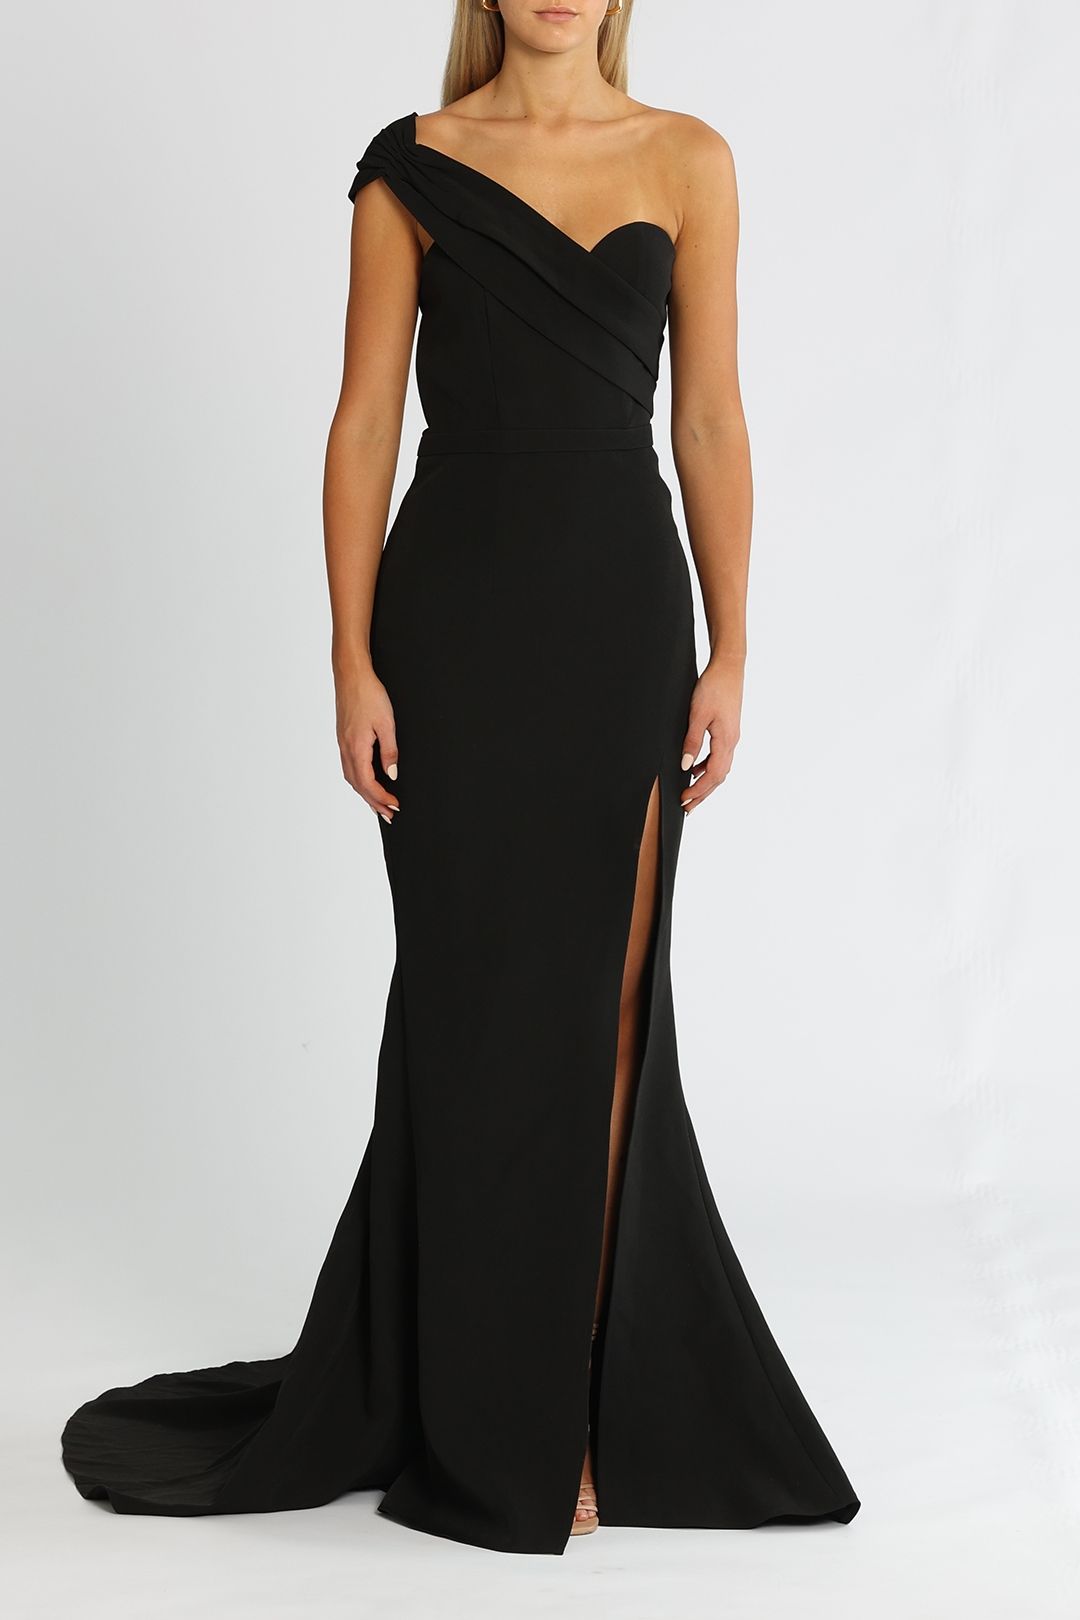 Elle Zeitoune One Sided Off The Shoulder Detail Gown Black